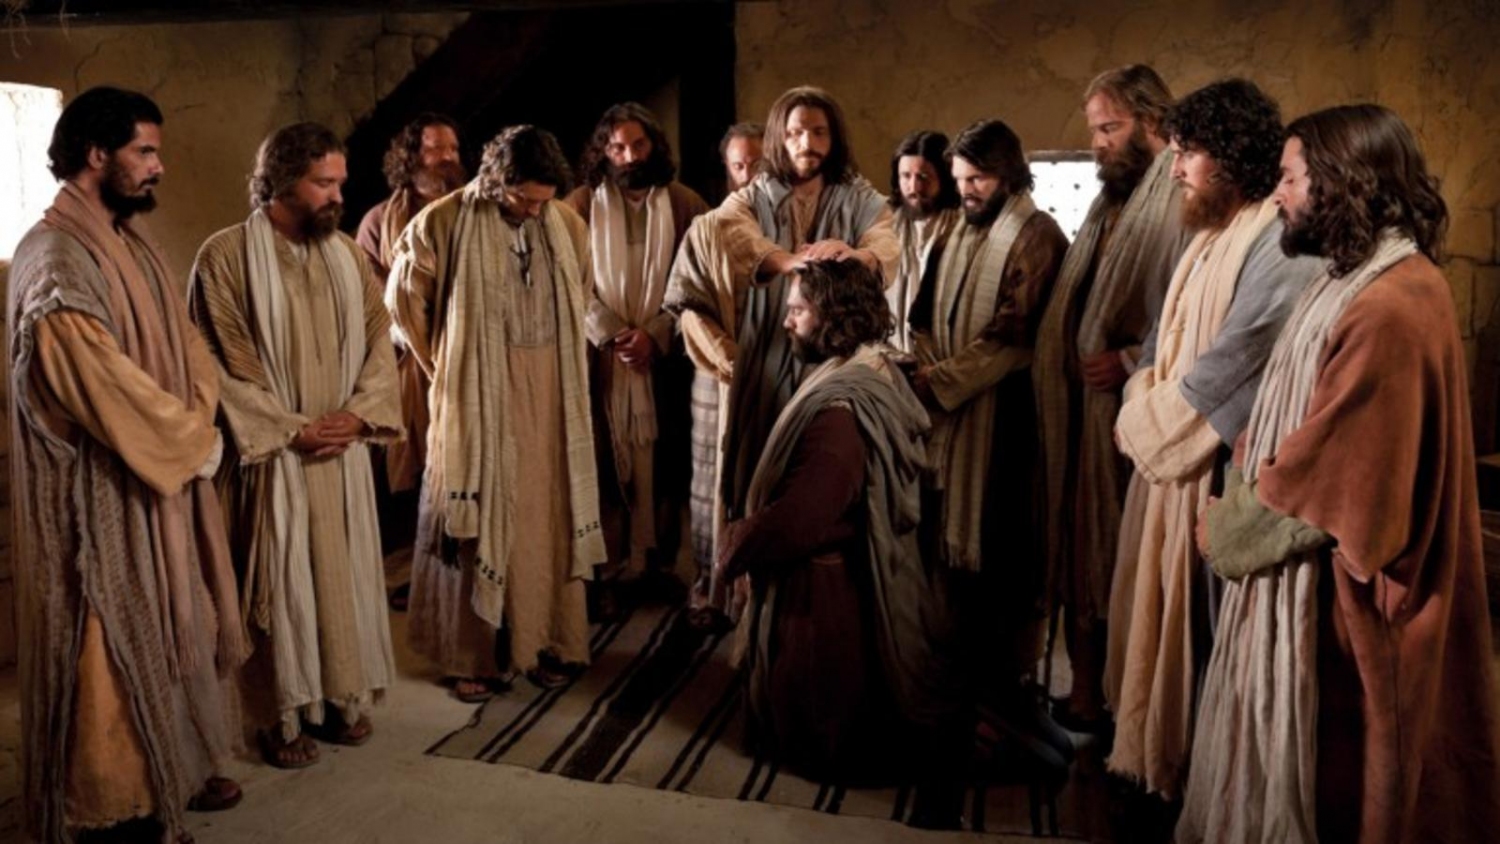 jesus calls twelve apostles to preach and bless others 2015 01 01